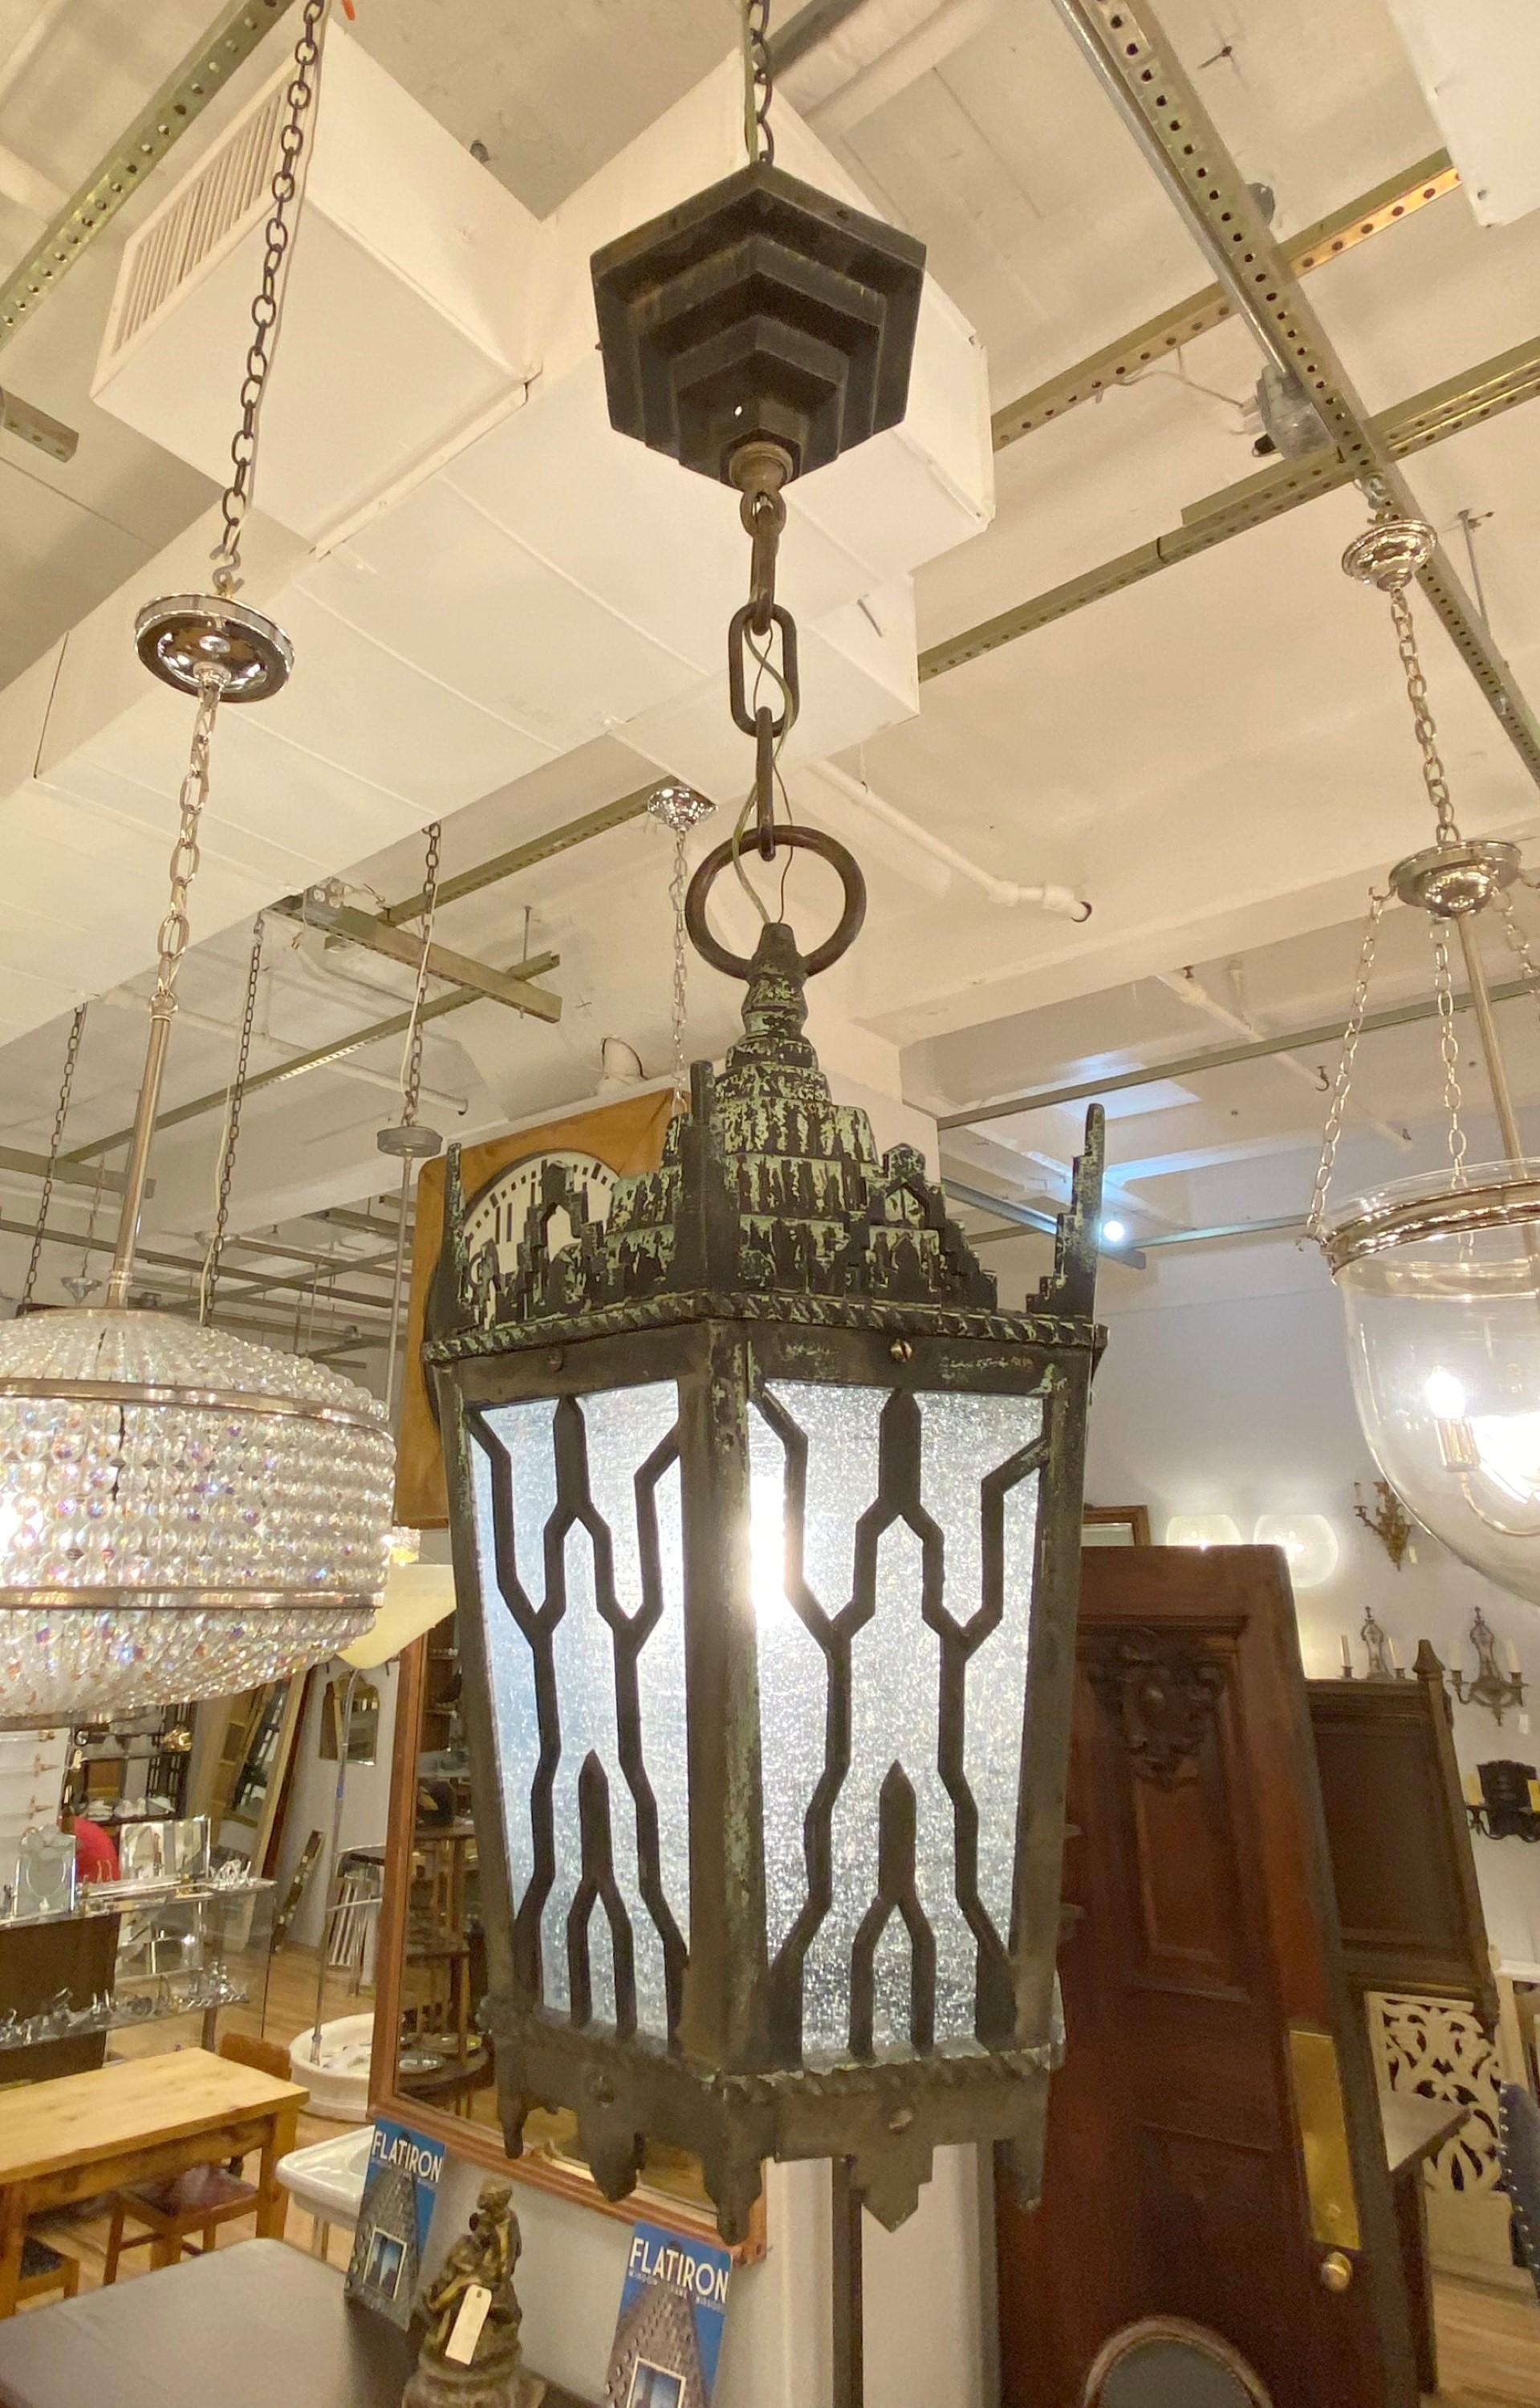 Early 20th century bronze Art Deco exterior ceiling lantern. Great for a foyer. Features seeded glass and a four tiered hexagon shaped matching canopy. Cleaned and restored. This takes one standard medium base light bulb. Please note, this item is